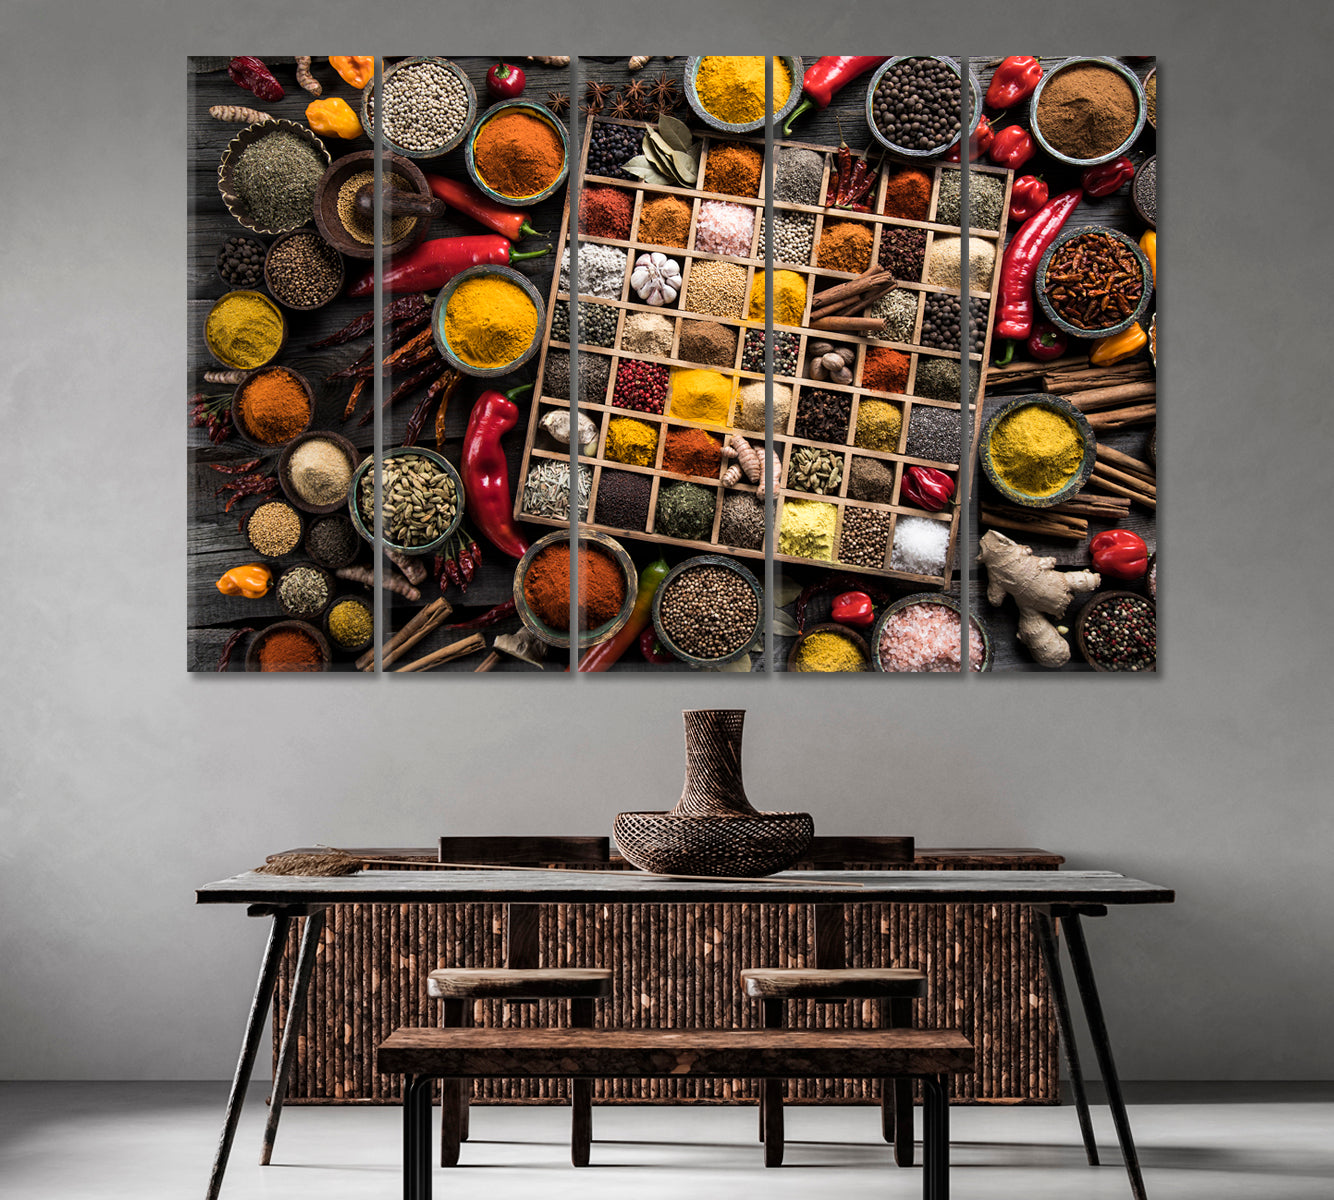 Variety of Spices and Herbs Canvas Print-Canvas Print-CetArt-1 Panel-24x16 inches-CetArt